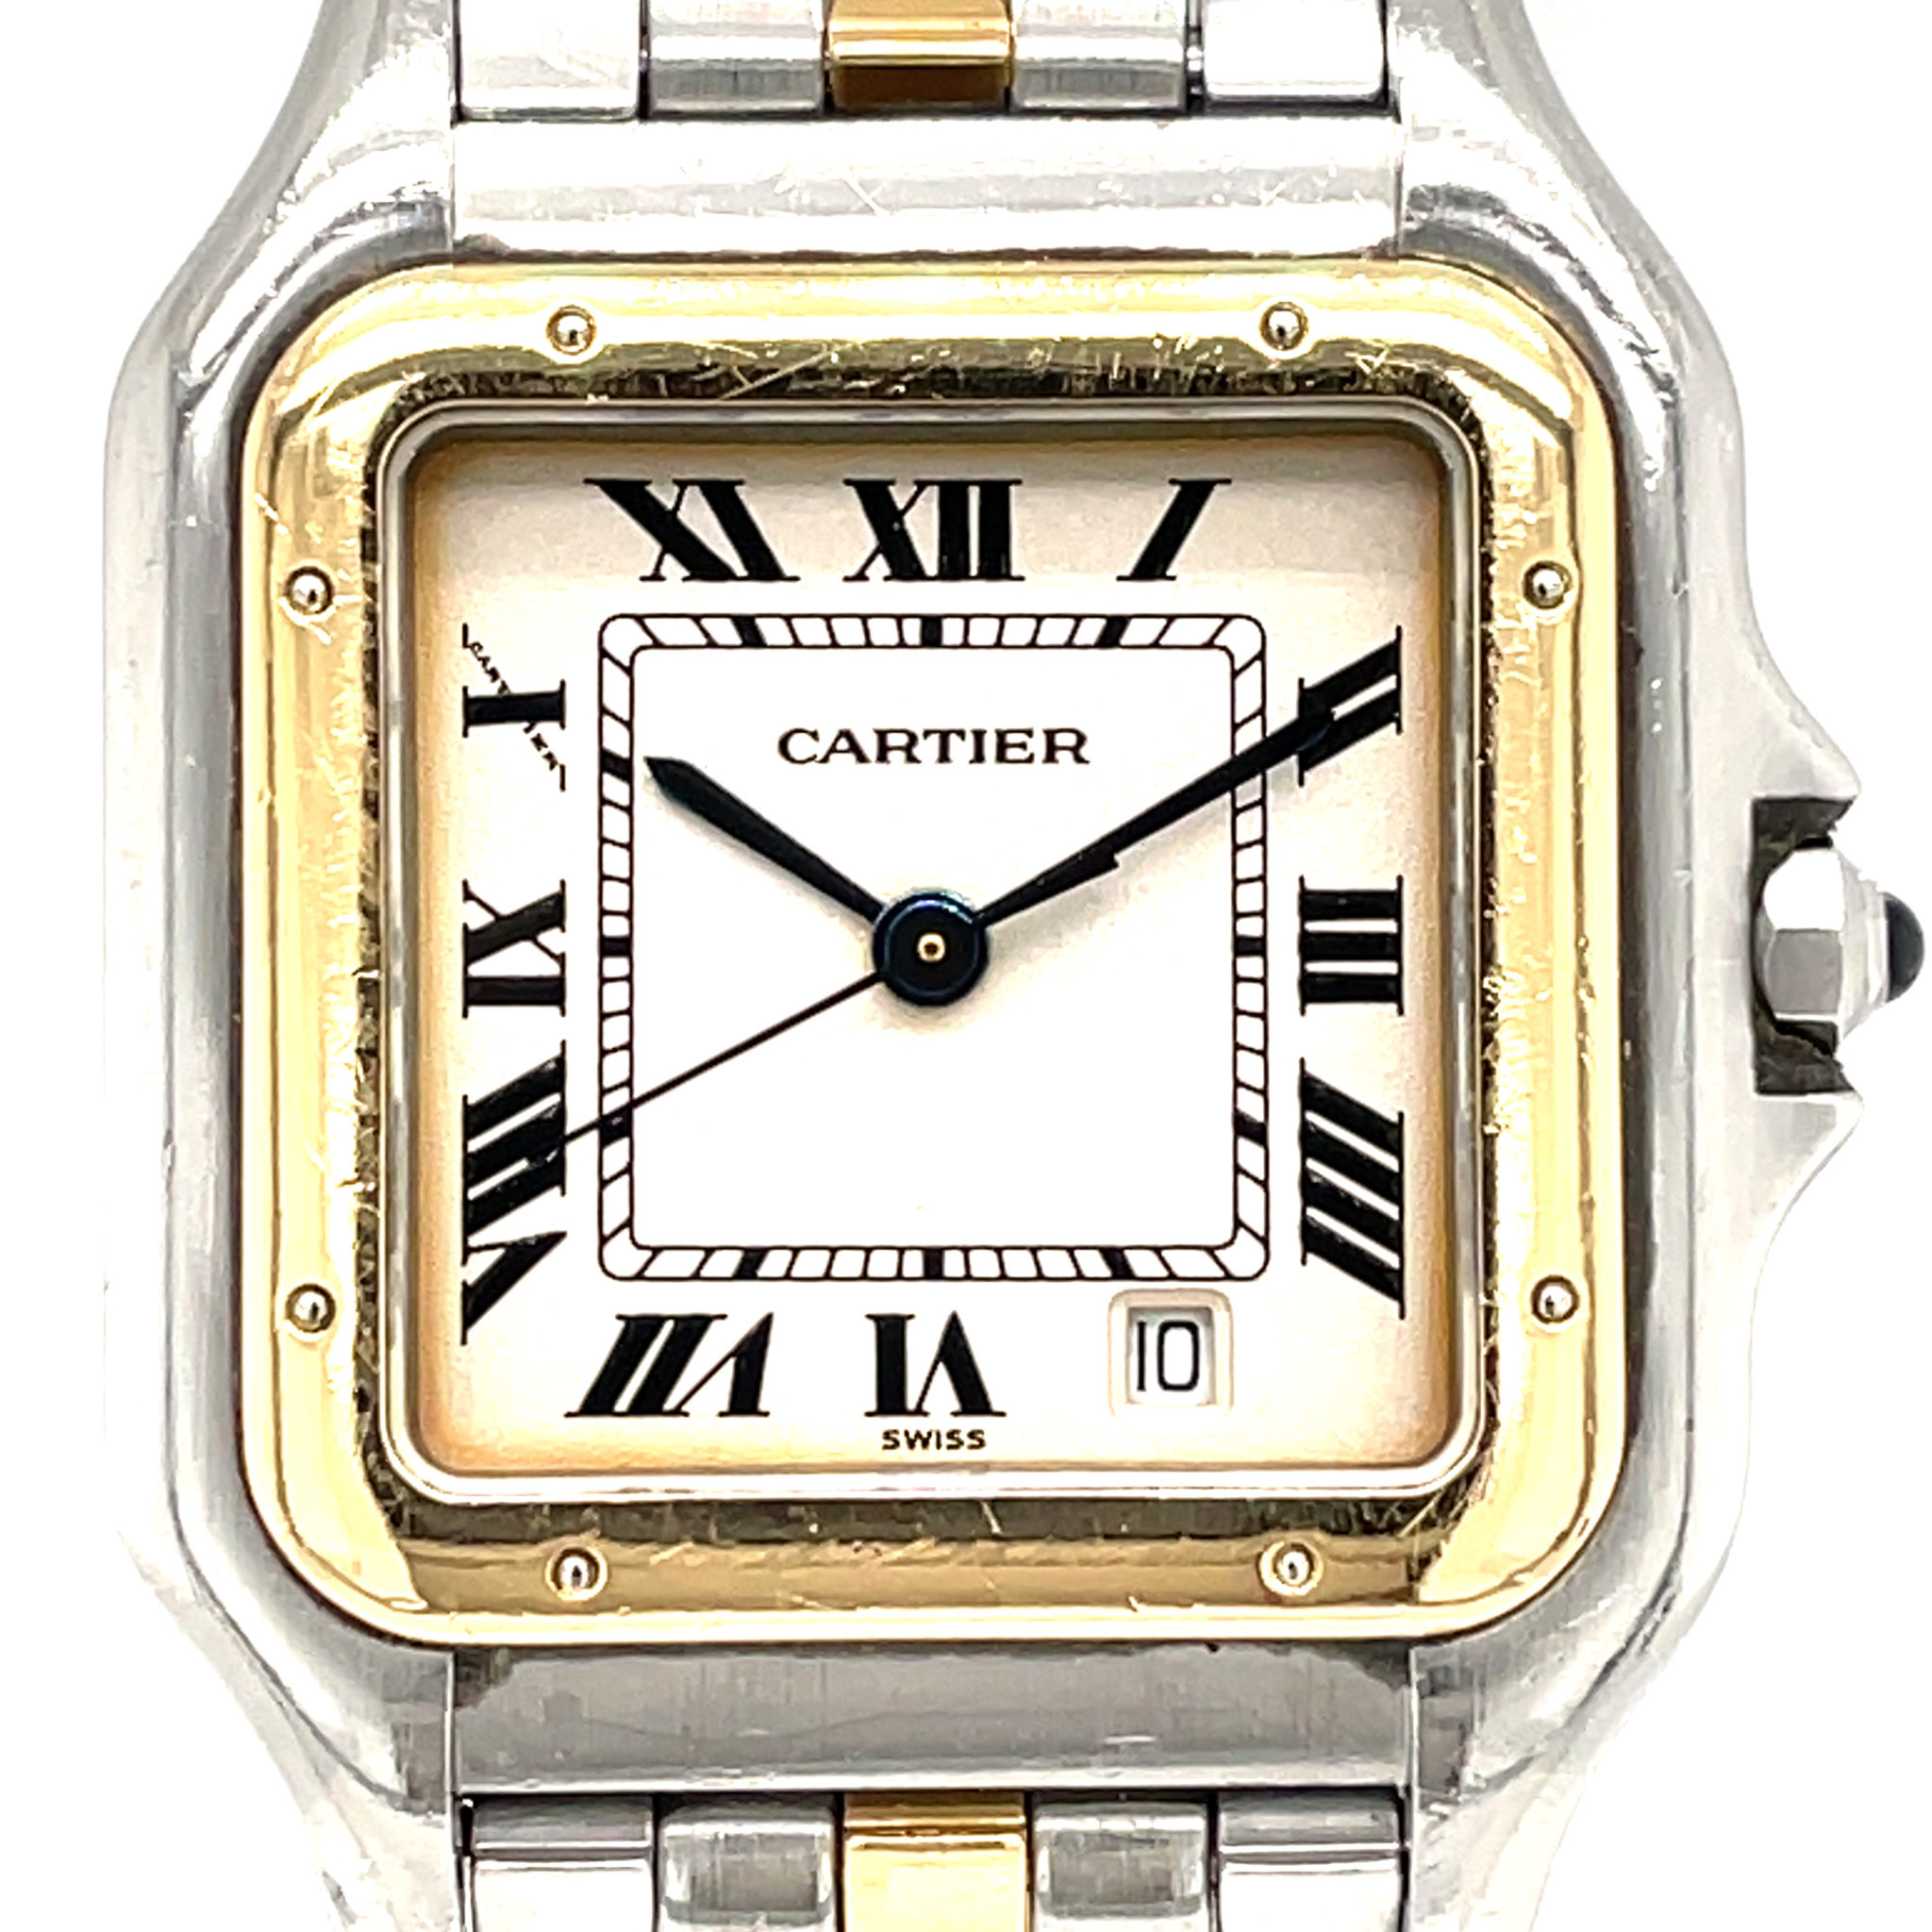 Cartier Panthere Stahl/Gold 1 row Gold, Ref 187949 27mm Vintage old school